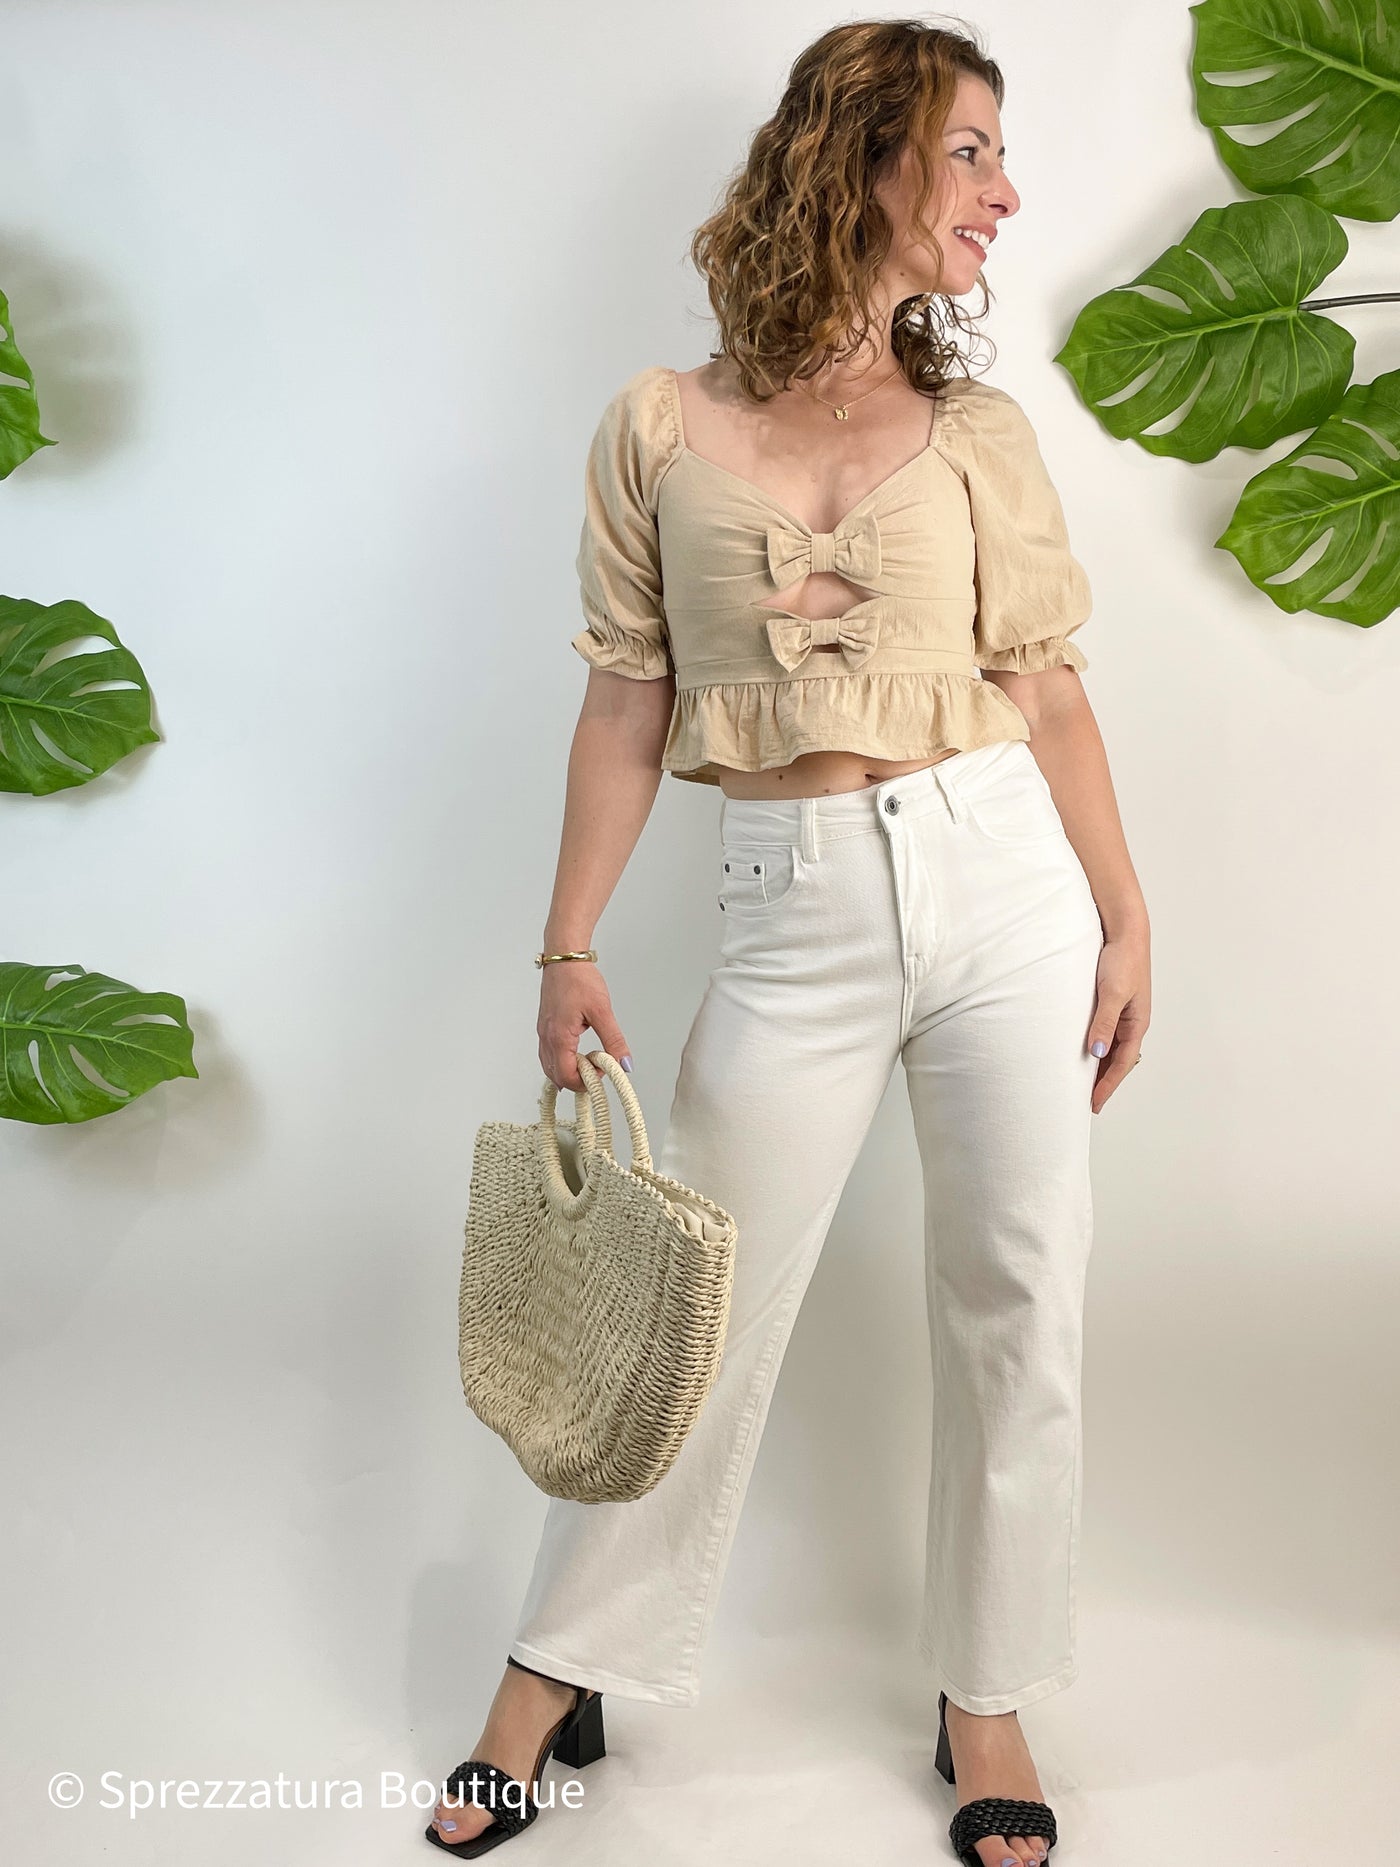 Neutral taupe color bow tie cut out detail blouse. Cropped top with ruffle adorable causal top with jeans or shorts. Natural color women's blouse for summer or fall with bows and ruffles. Cutout detail